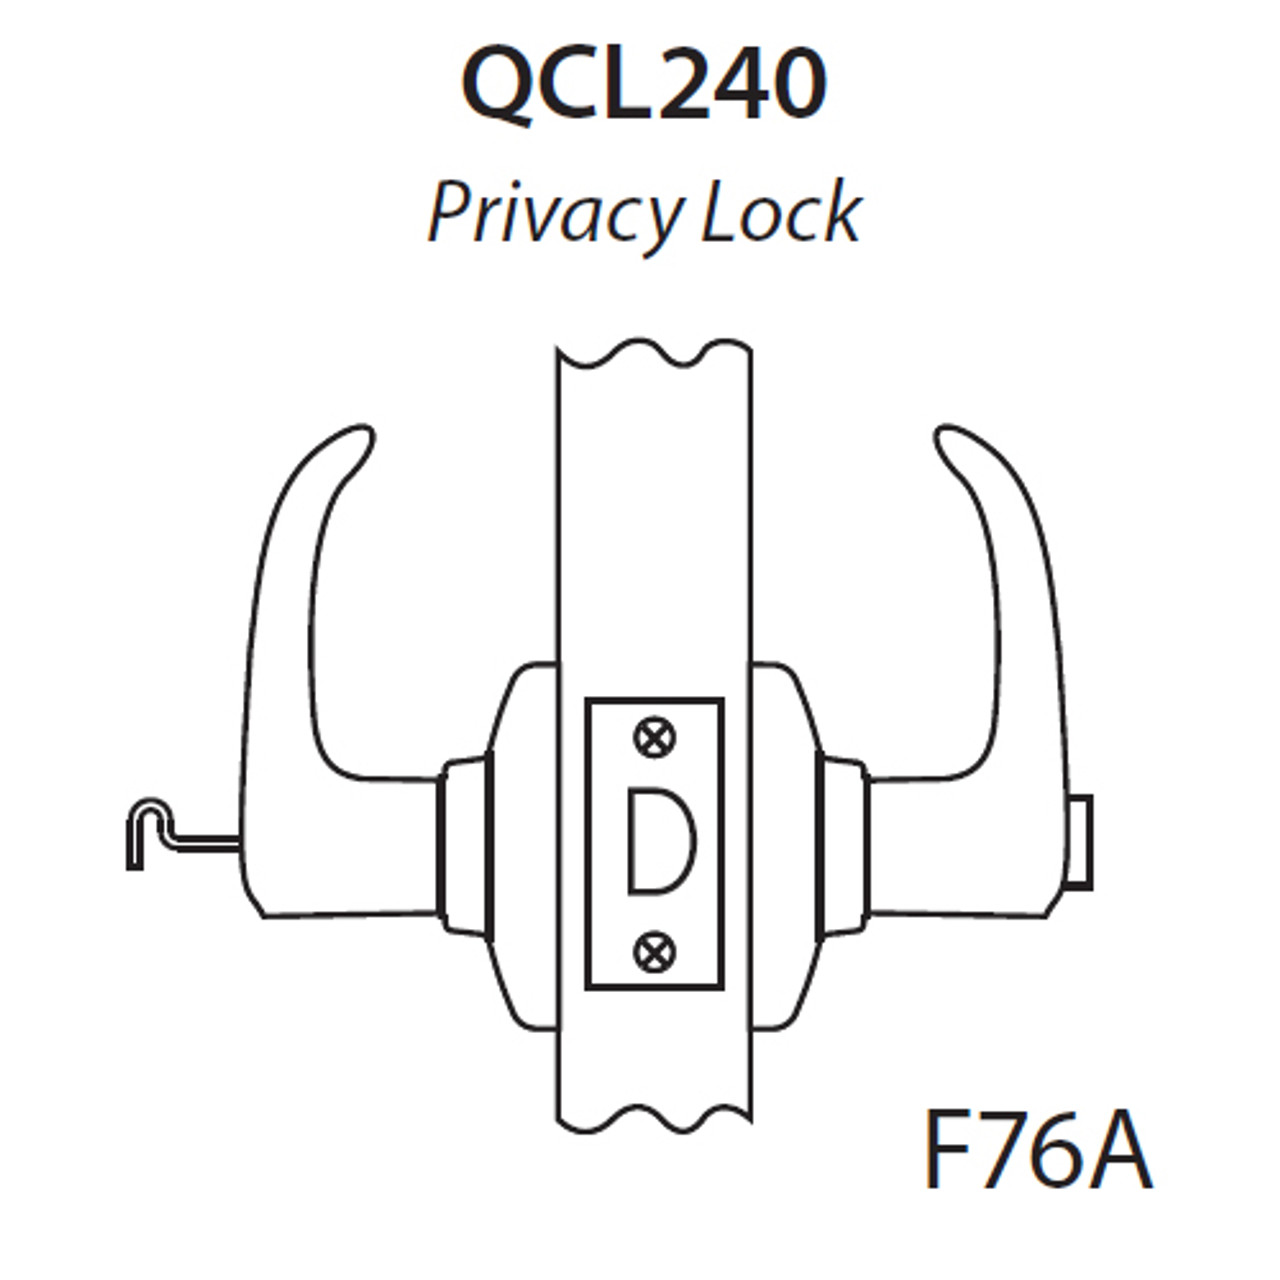 QCL240E625NS4NOS Stanley QCL200 Series Cylindrical Privacy Lock with Sierra Lever in Bright Chrome